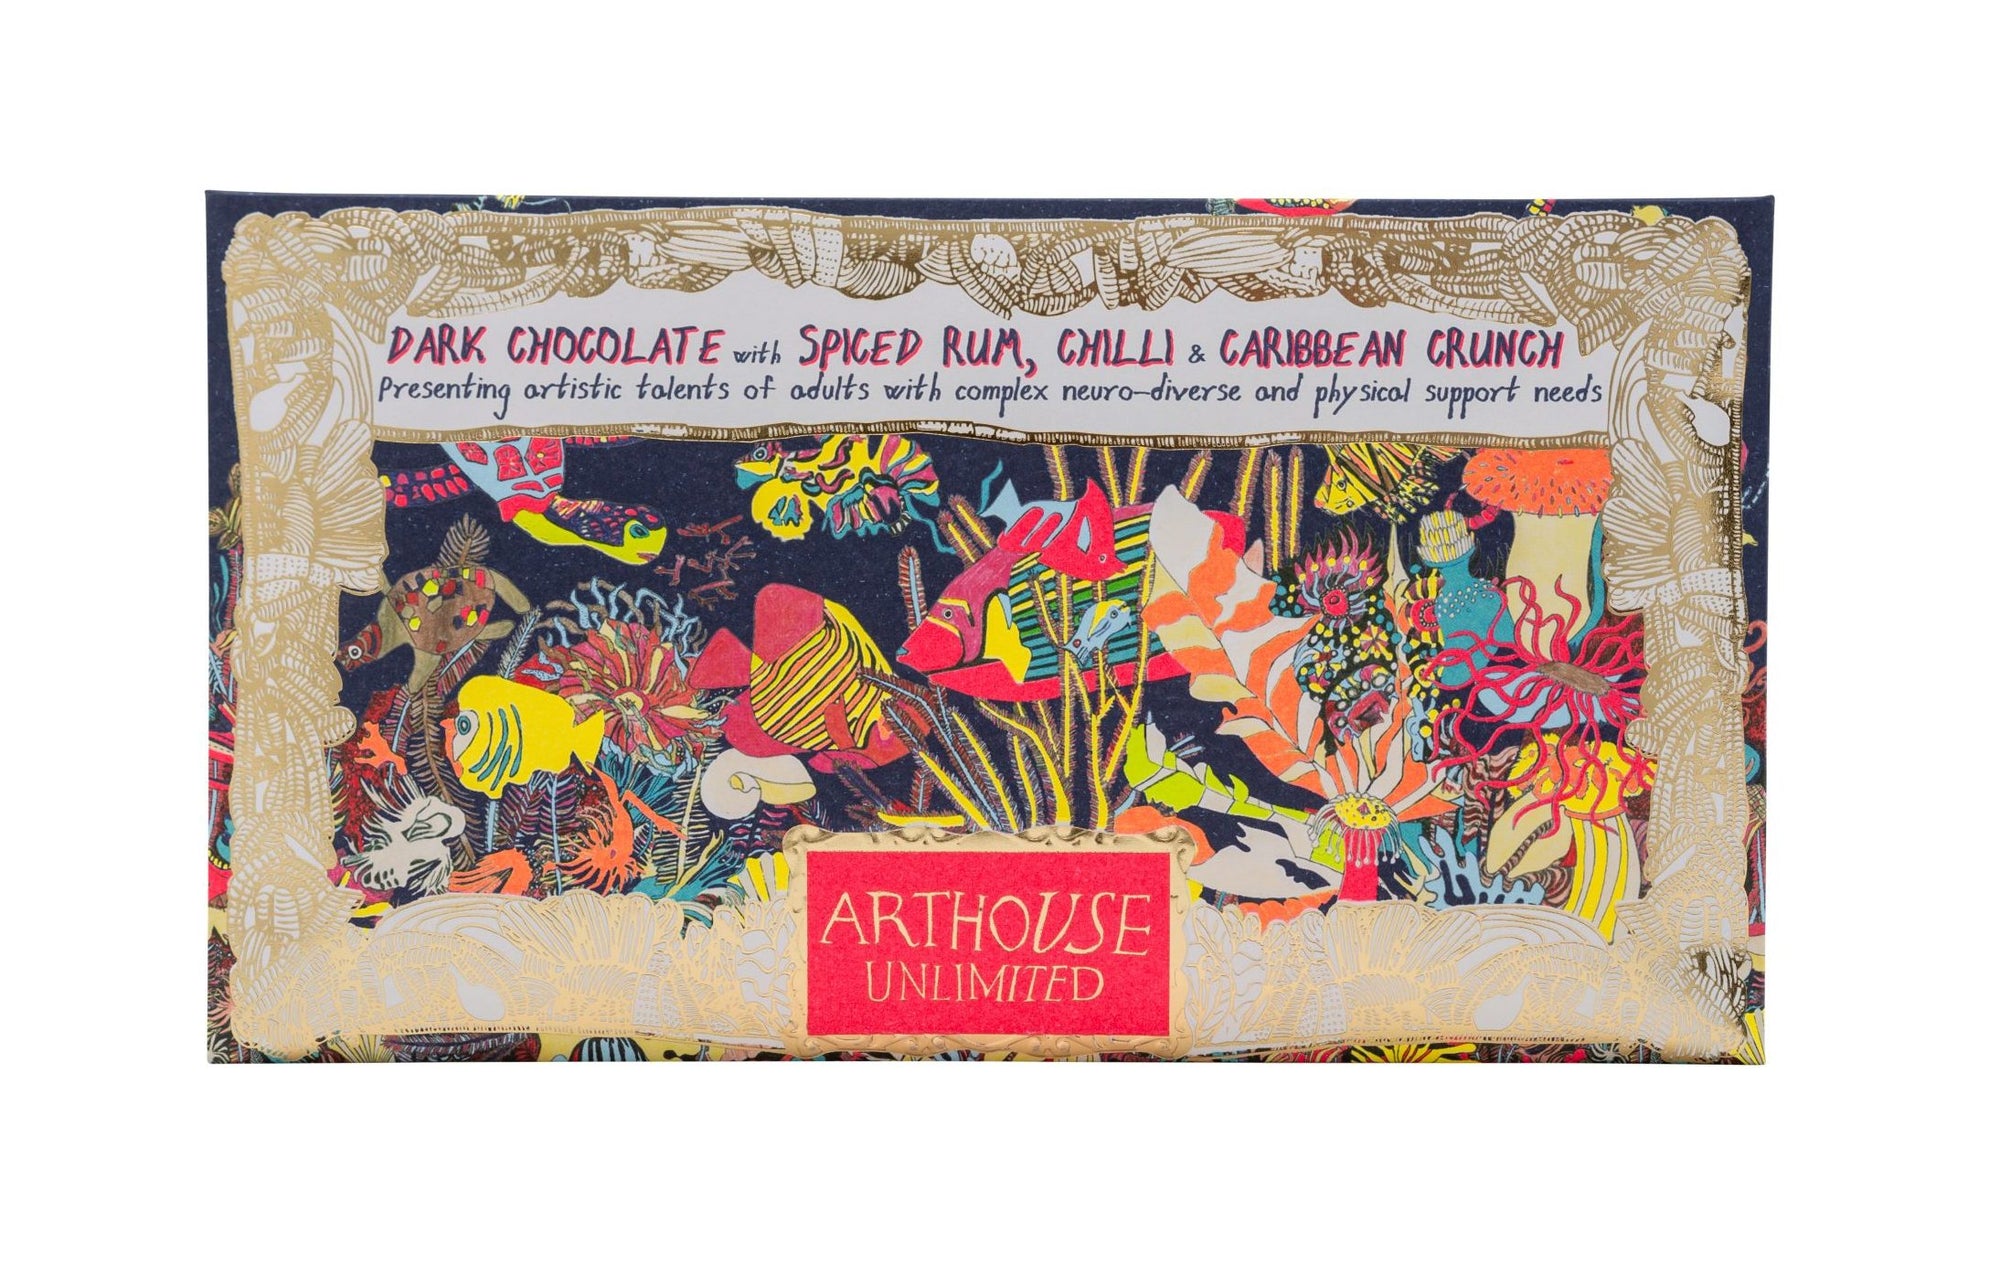 Angels of the Deep Chocolate Bar - Dark Chocolate with Spiced Rum, Chilli and Carribean Crunch by arthouse unlimited at penny black